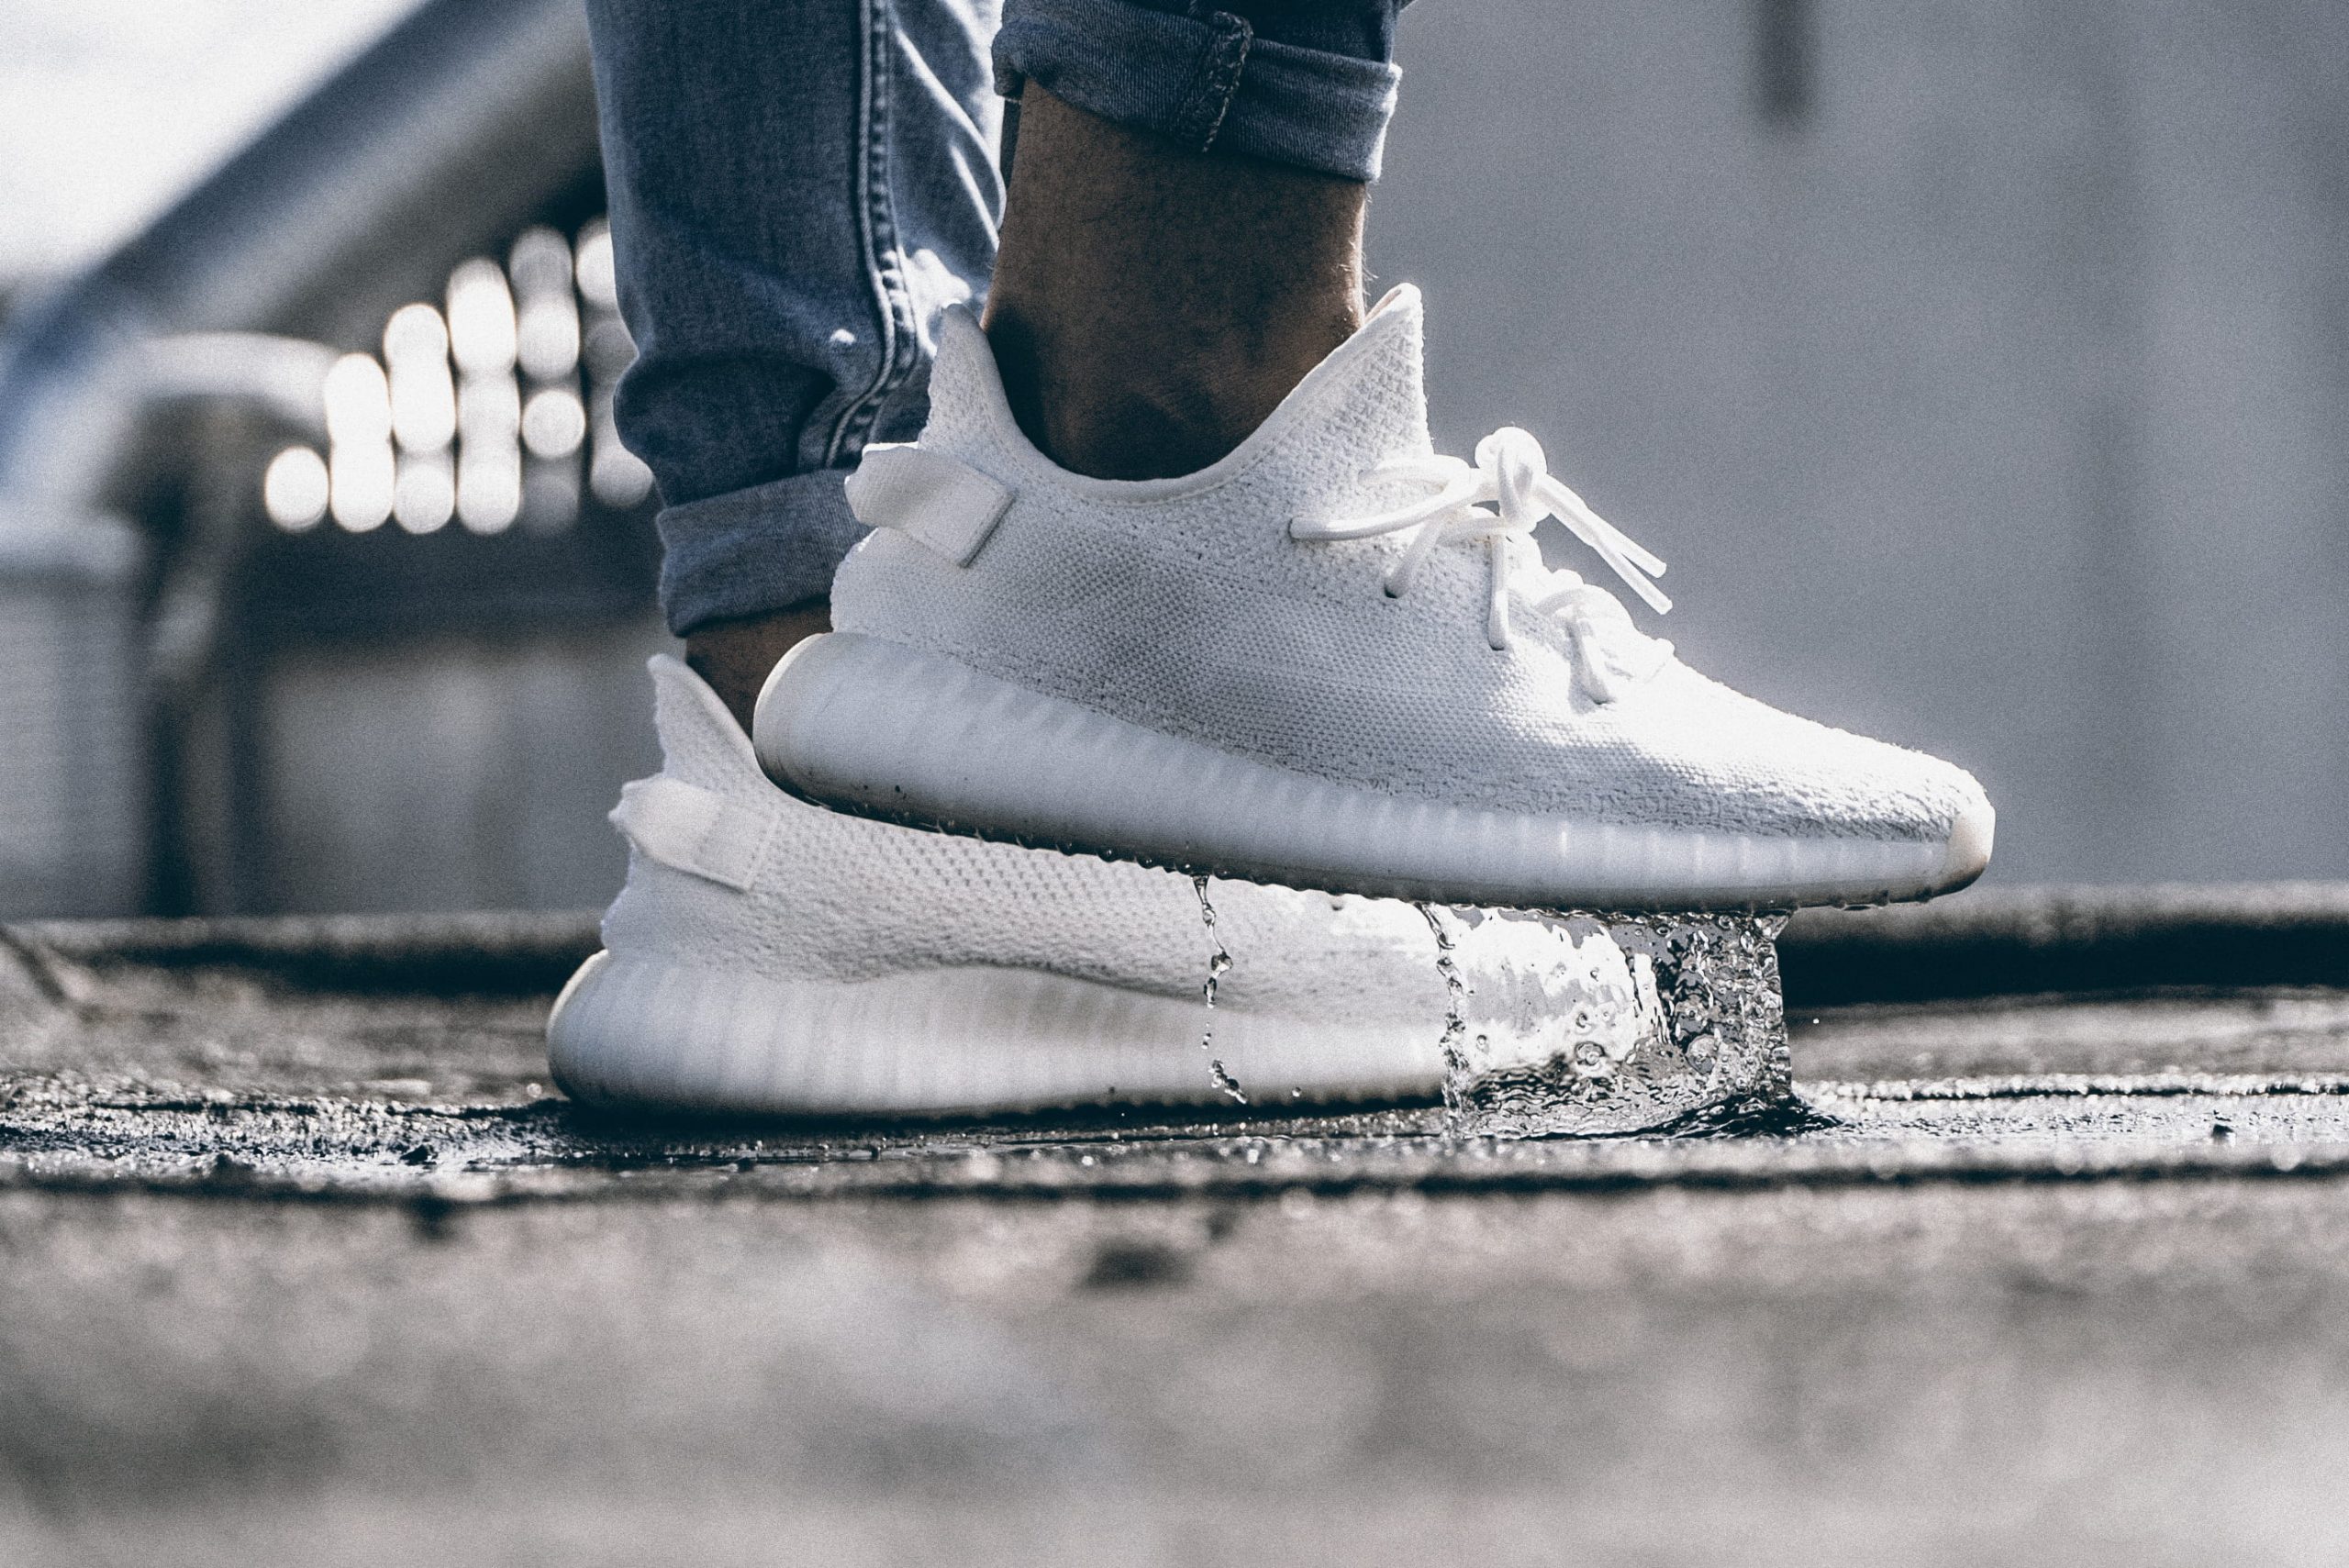 Person wearing pair of cream white Adidas Yeezy Boost 350 shoes wallpaper